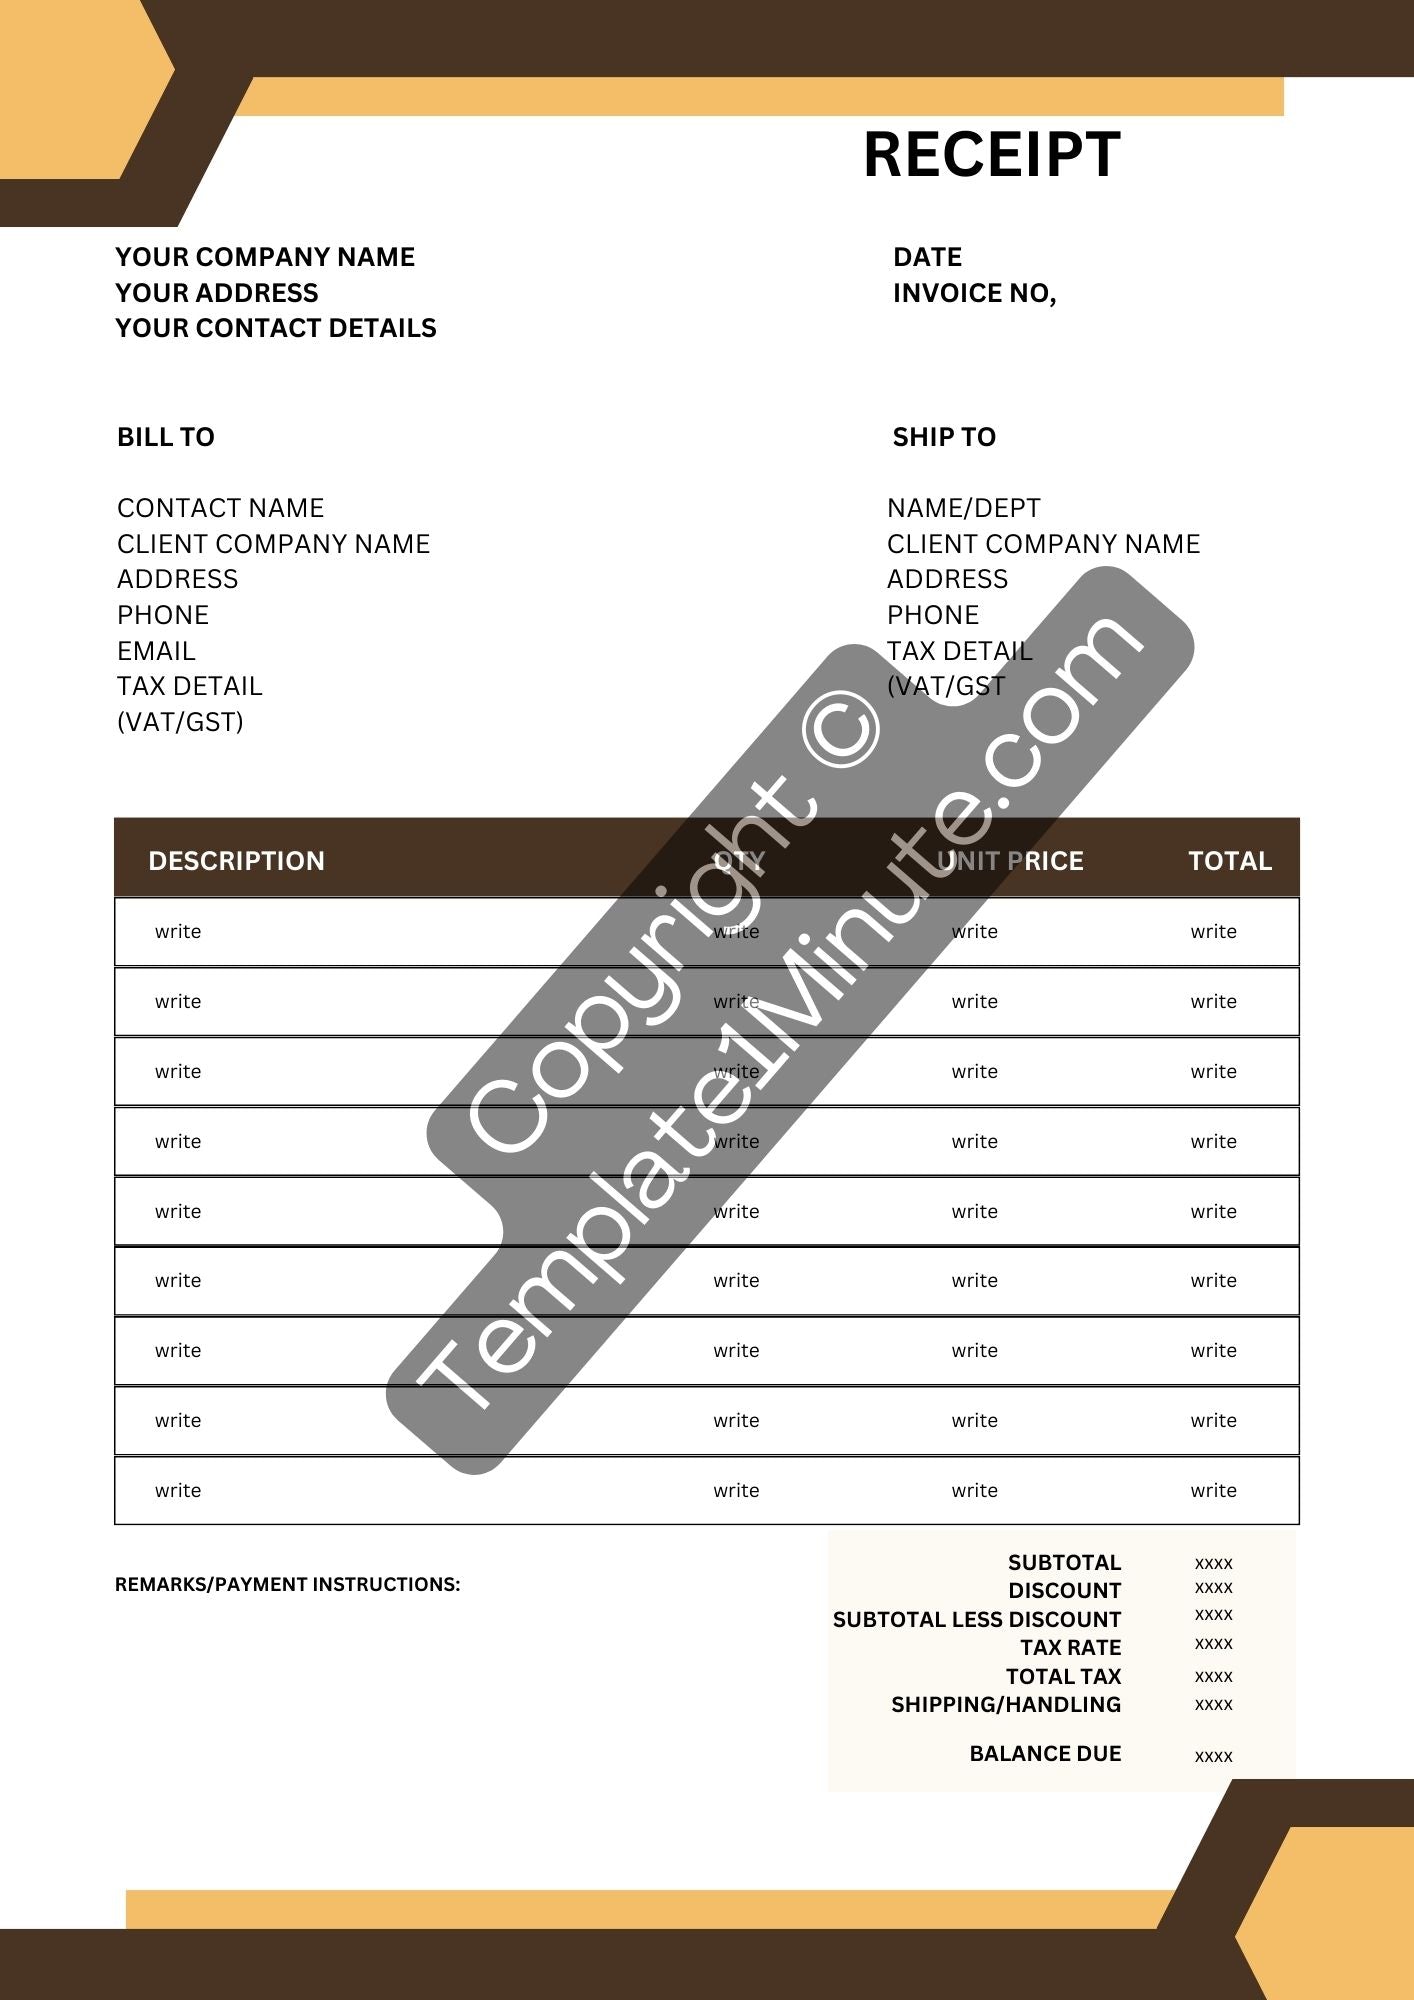 Company Receipt Template [Pdf, Excel & Word] (Pack of 5)